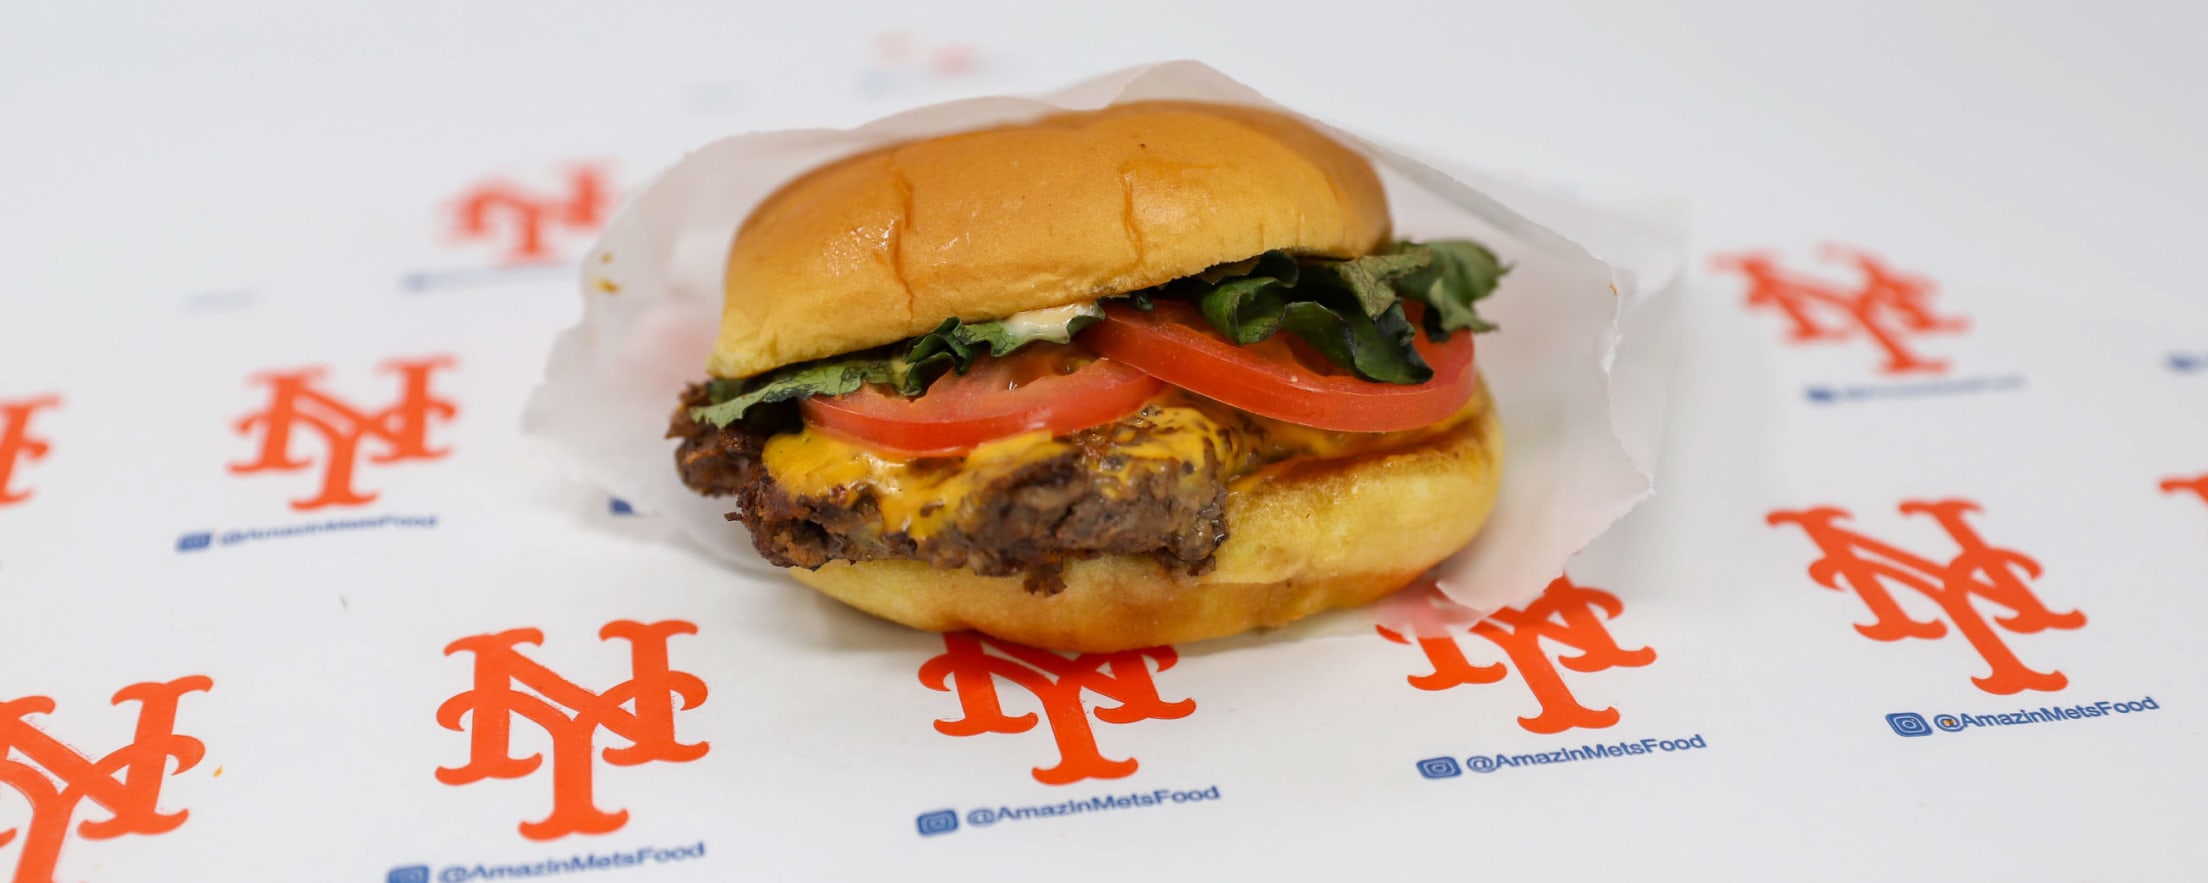 Food and Drink Highlights at Citi Field